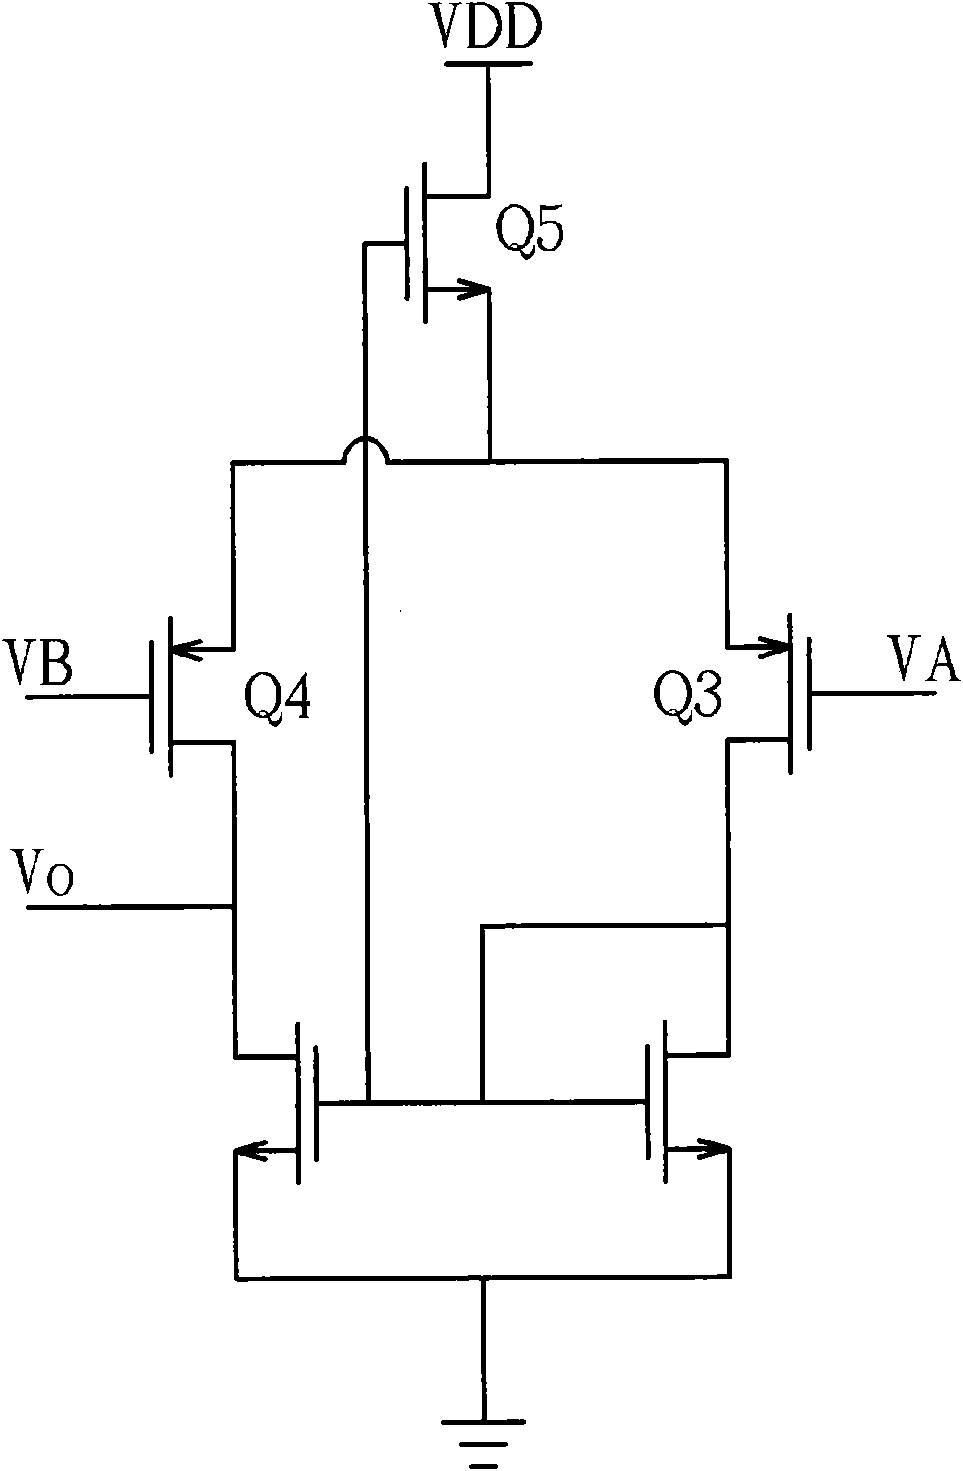 Band gap reference circuit and band gap reference current source